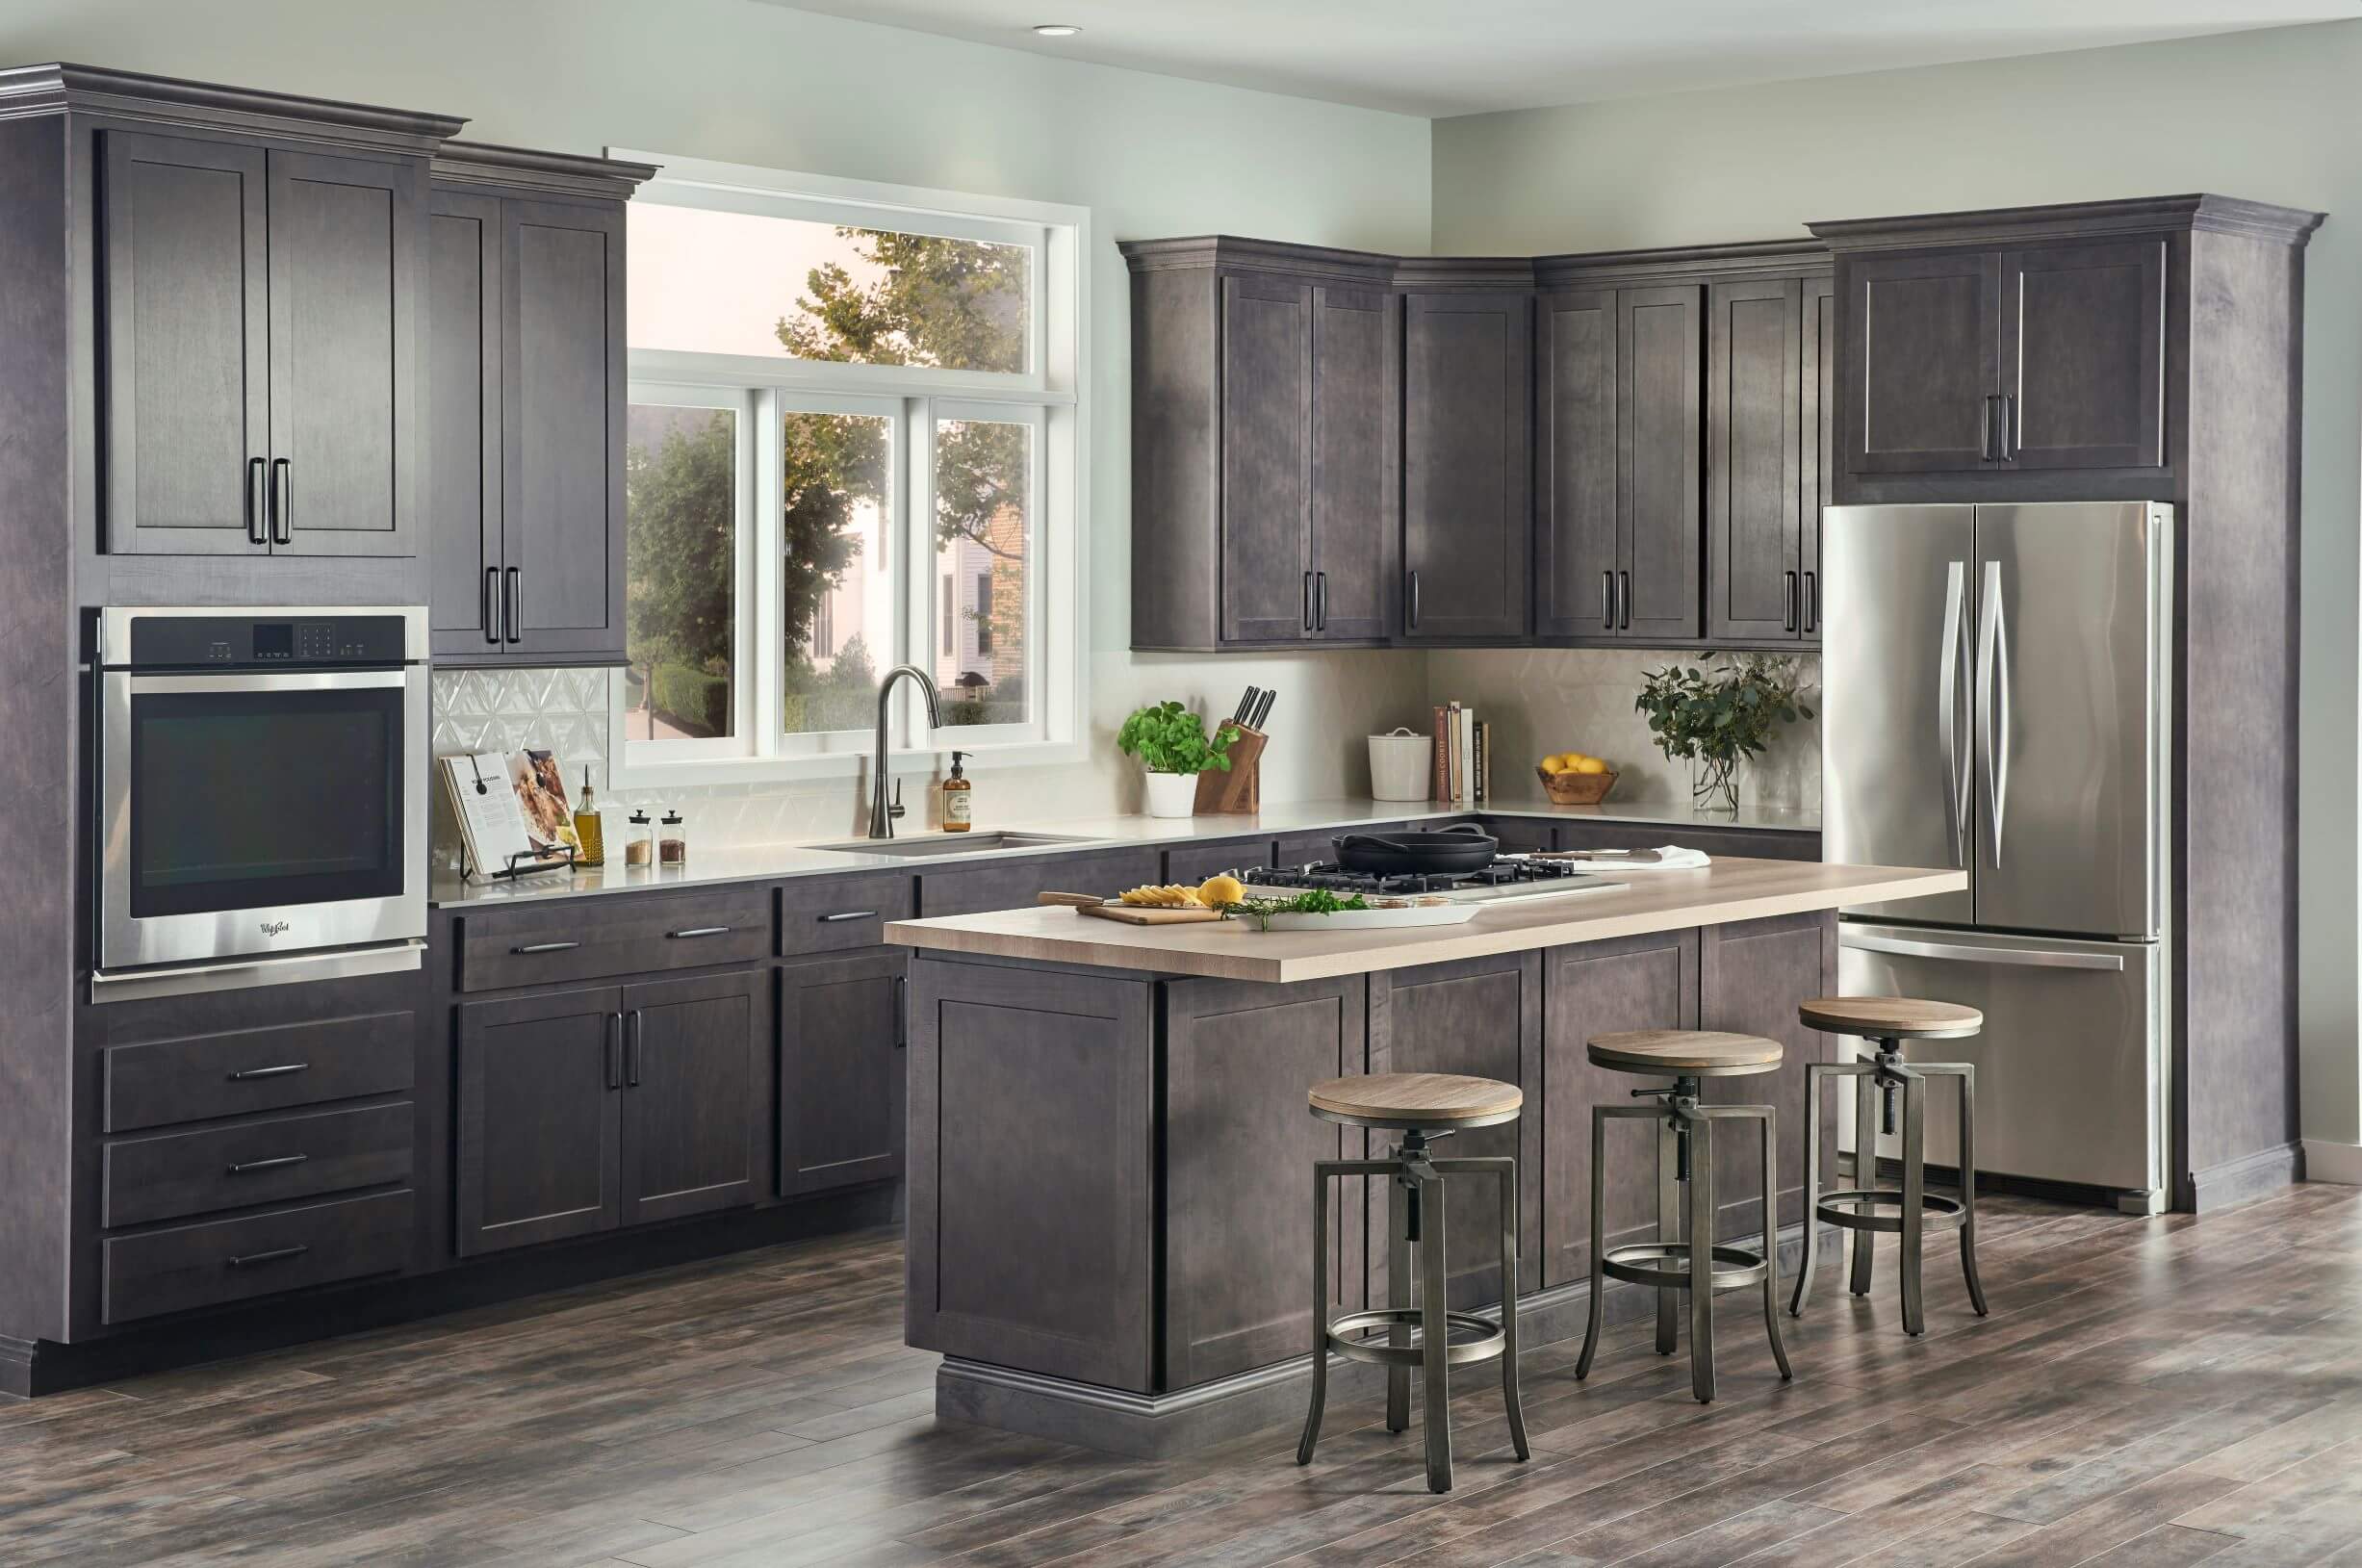 Wolf Kitchen Cabinet Sets Come In A Variety Of Styles and Colors